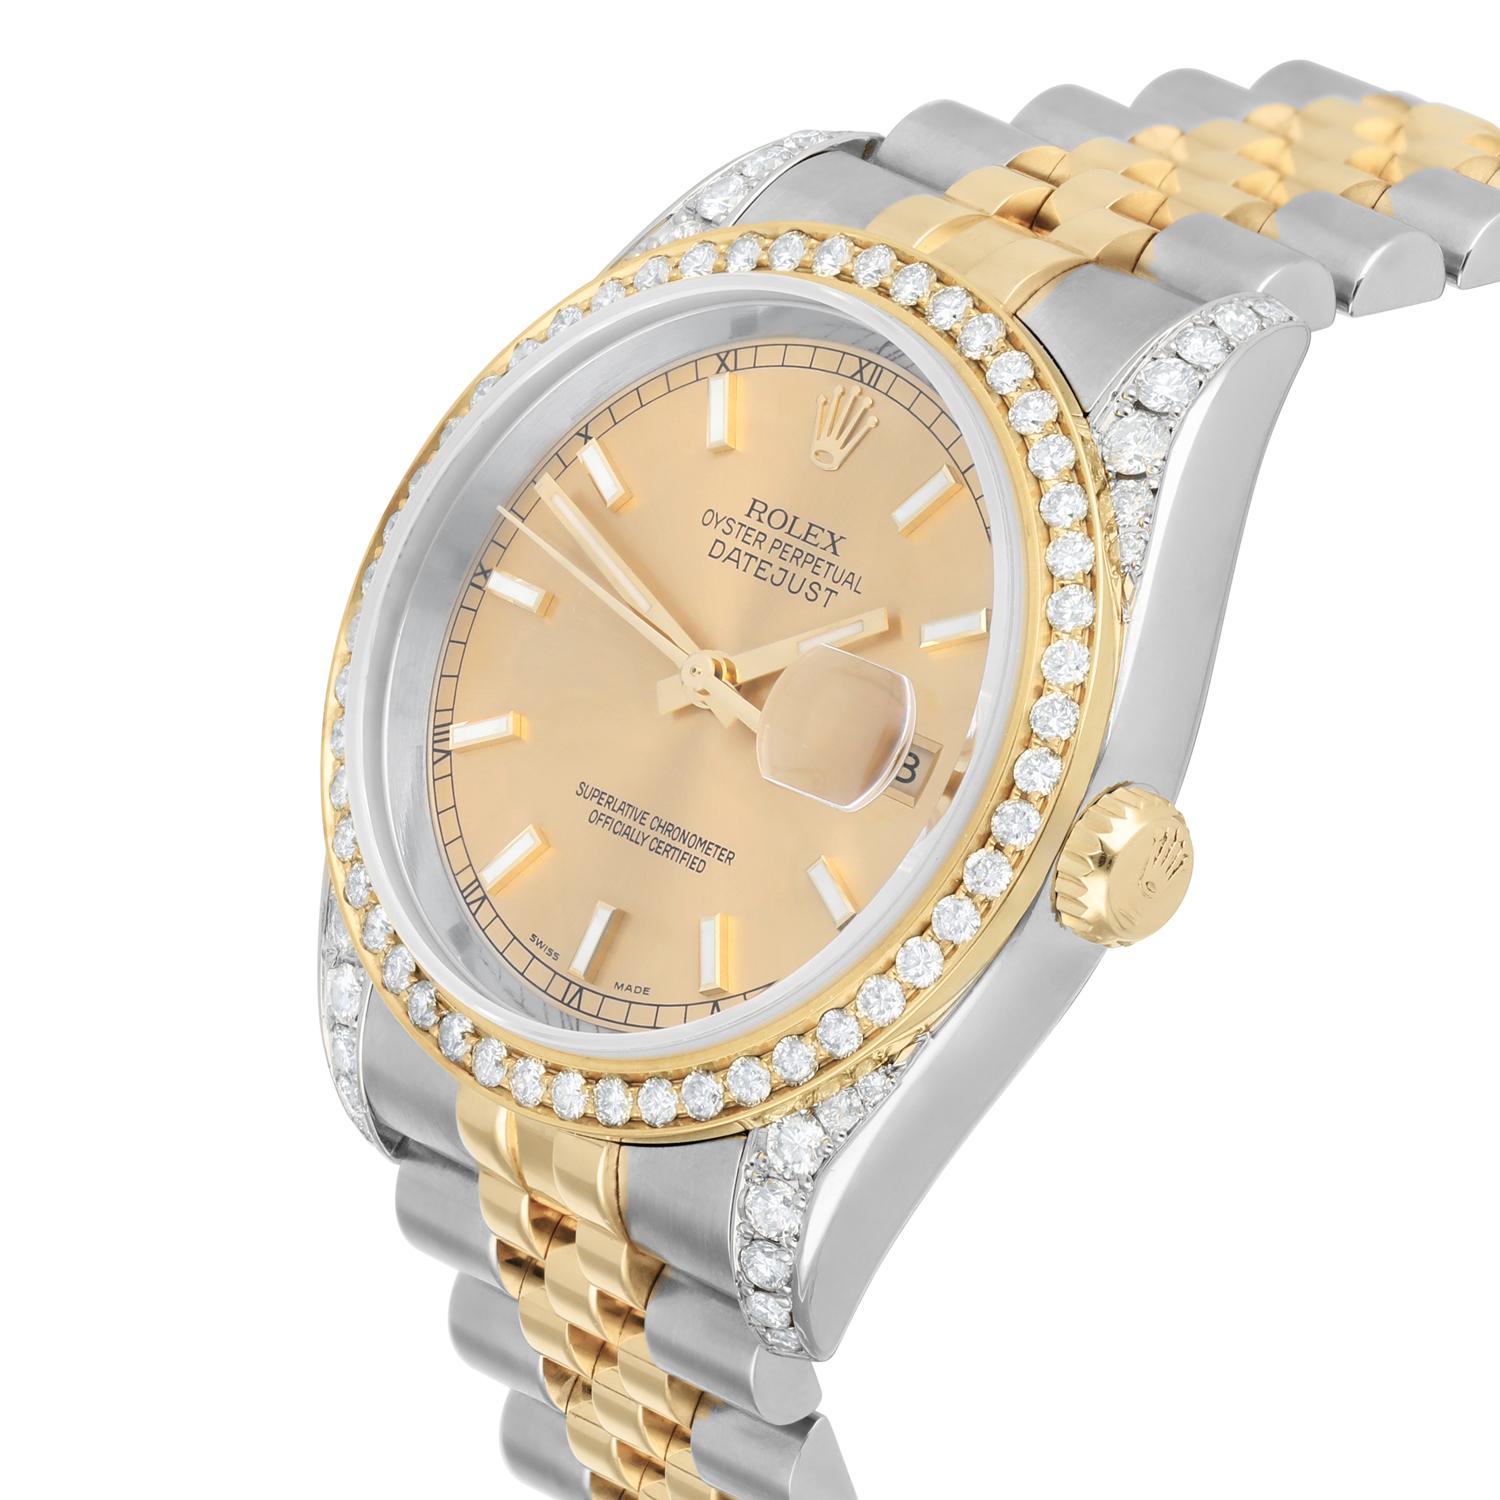 Women's or Men's Rolex Datejust 36 Gold & Steel 116233 Champagne Index Dial Diamond Watch For Sale